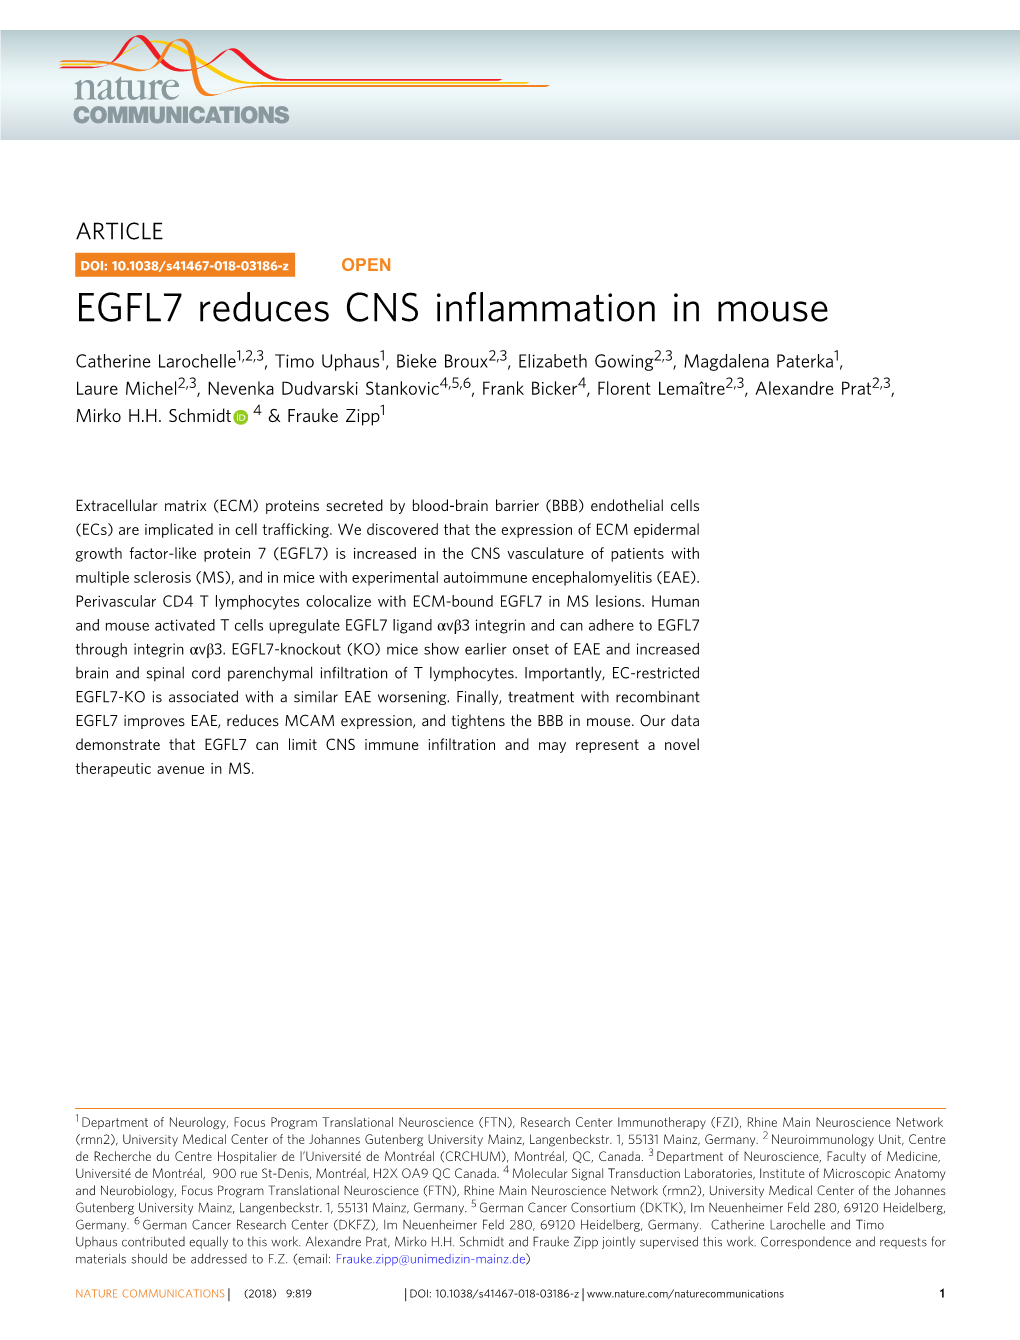 EGFL7 Reduces CNS Inflammation in Mouse